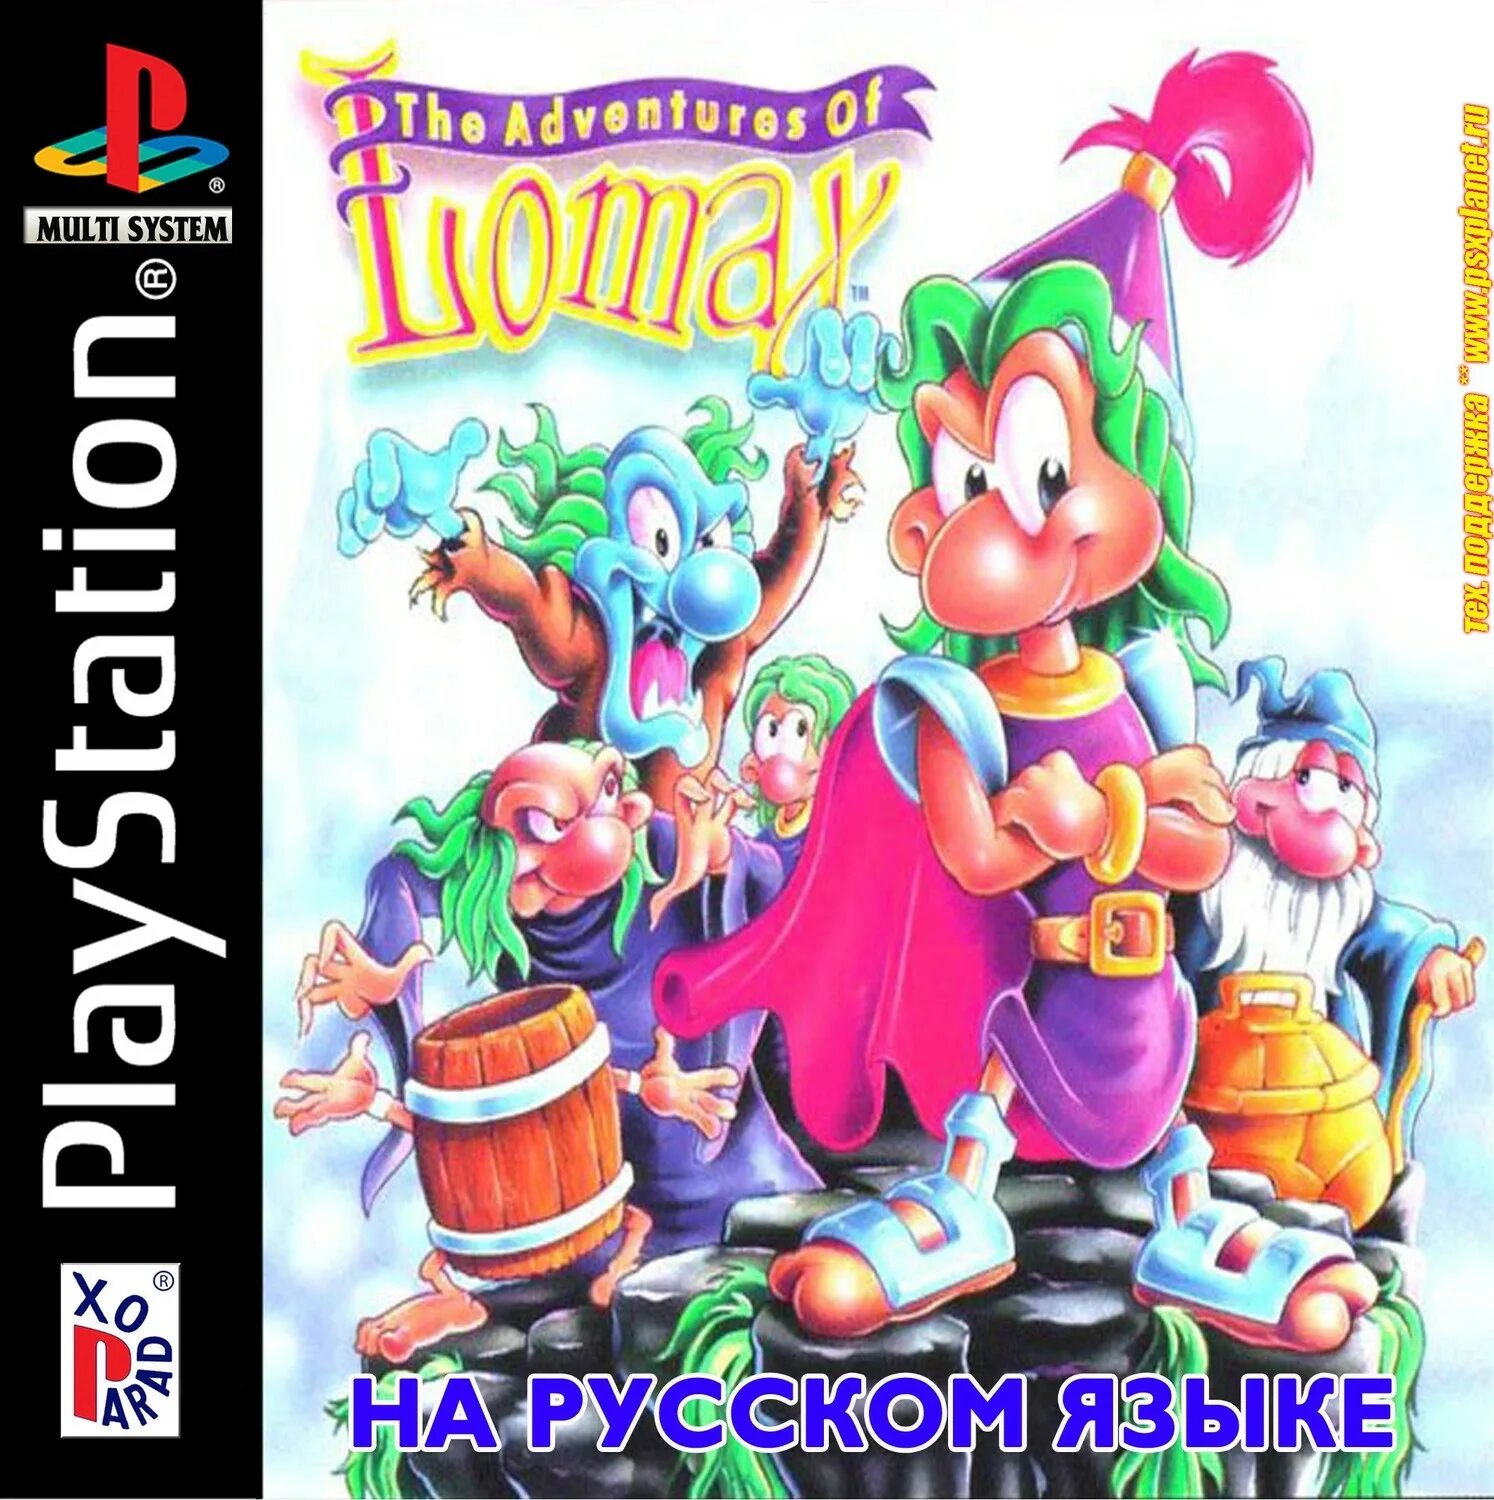 The adventures. Adventures of Lomax ps1. Adventures of Lomax игра ps1. Adventures of Lomax, the (Lomax). Adventures of Lomax (Rus).